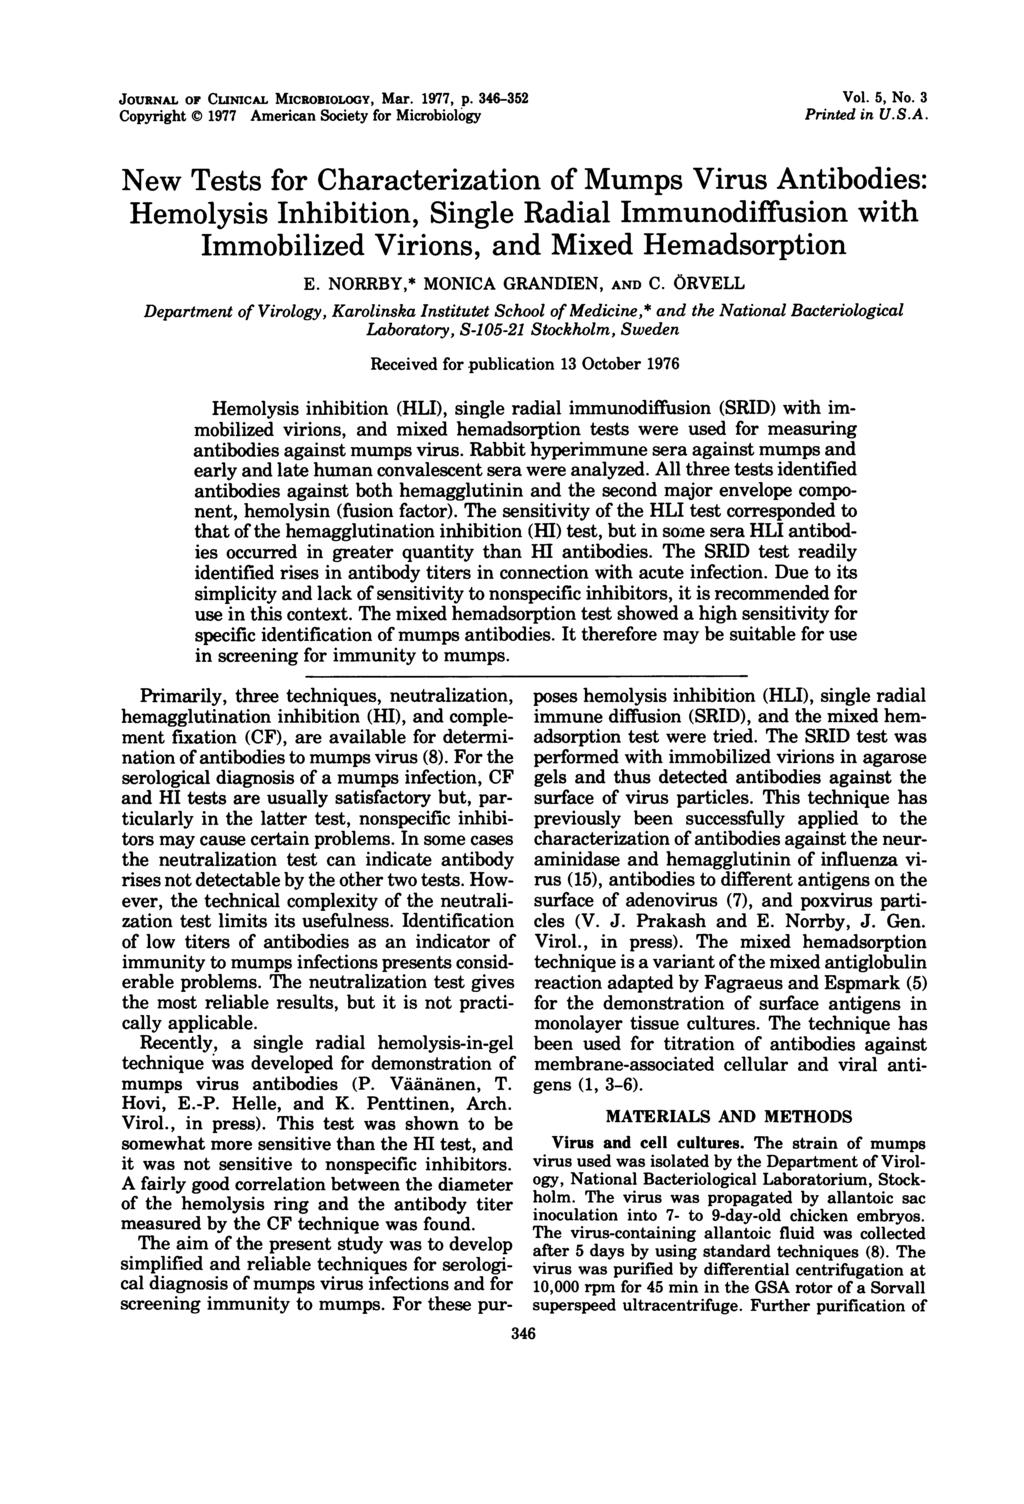 JOURNAL OF CLINICAL MICROBIOLOGY, Mar. 1977, p. 346-352 Copyright 1977 American Society for Microbiology Vol. 5, No. 3 Printed in U.S.A. New Tests for Characterization of Mumps Virus Antibodies: Hemolysis Inhibition, Single Radial Immunodiffusion with Immobilized Virions, and Mixed Hemadsorption E.